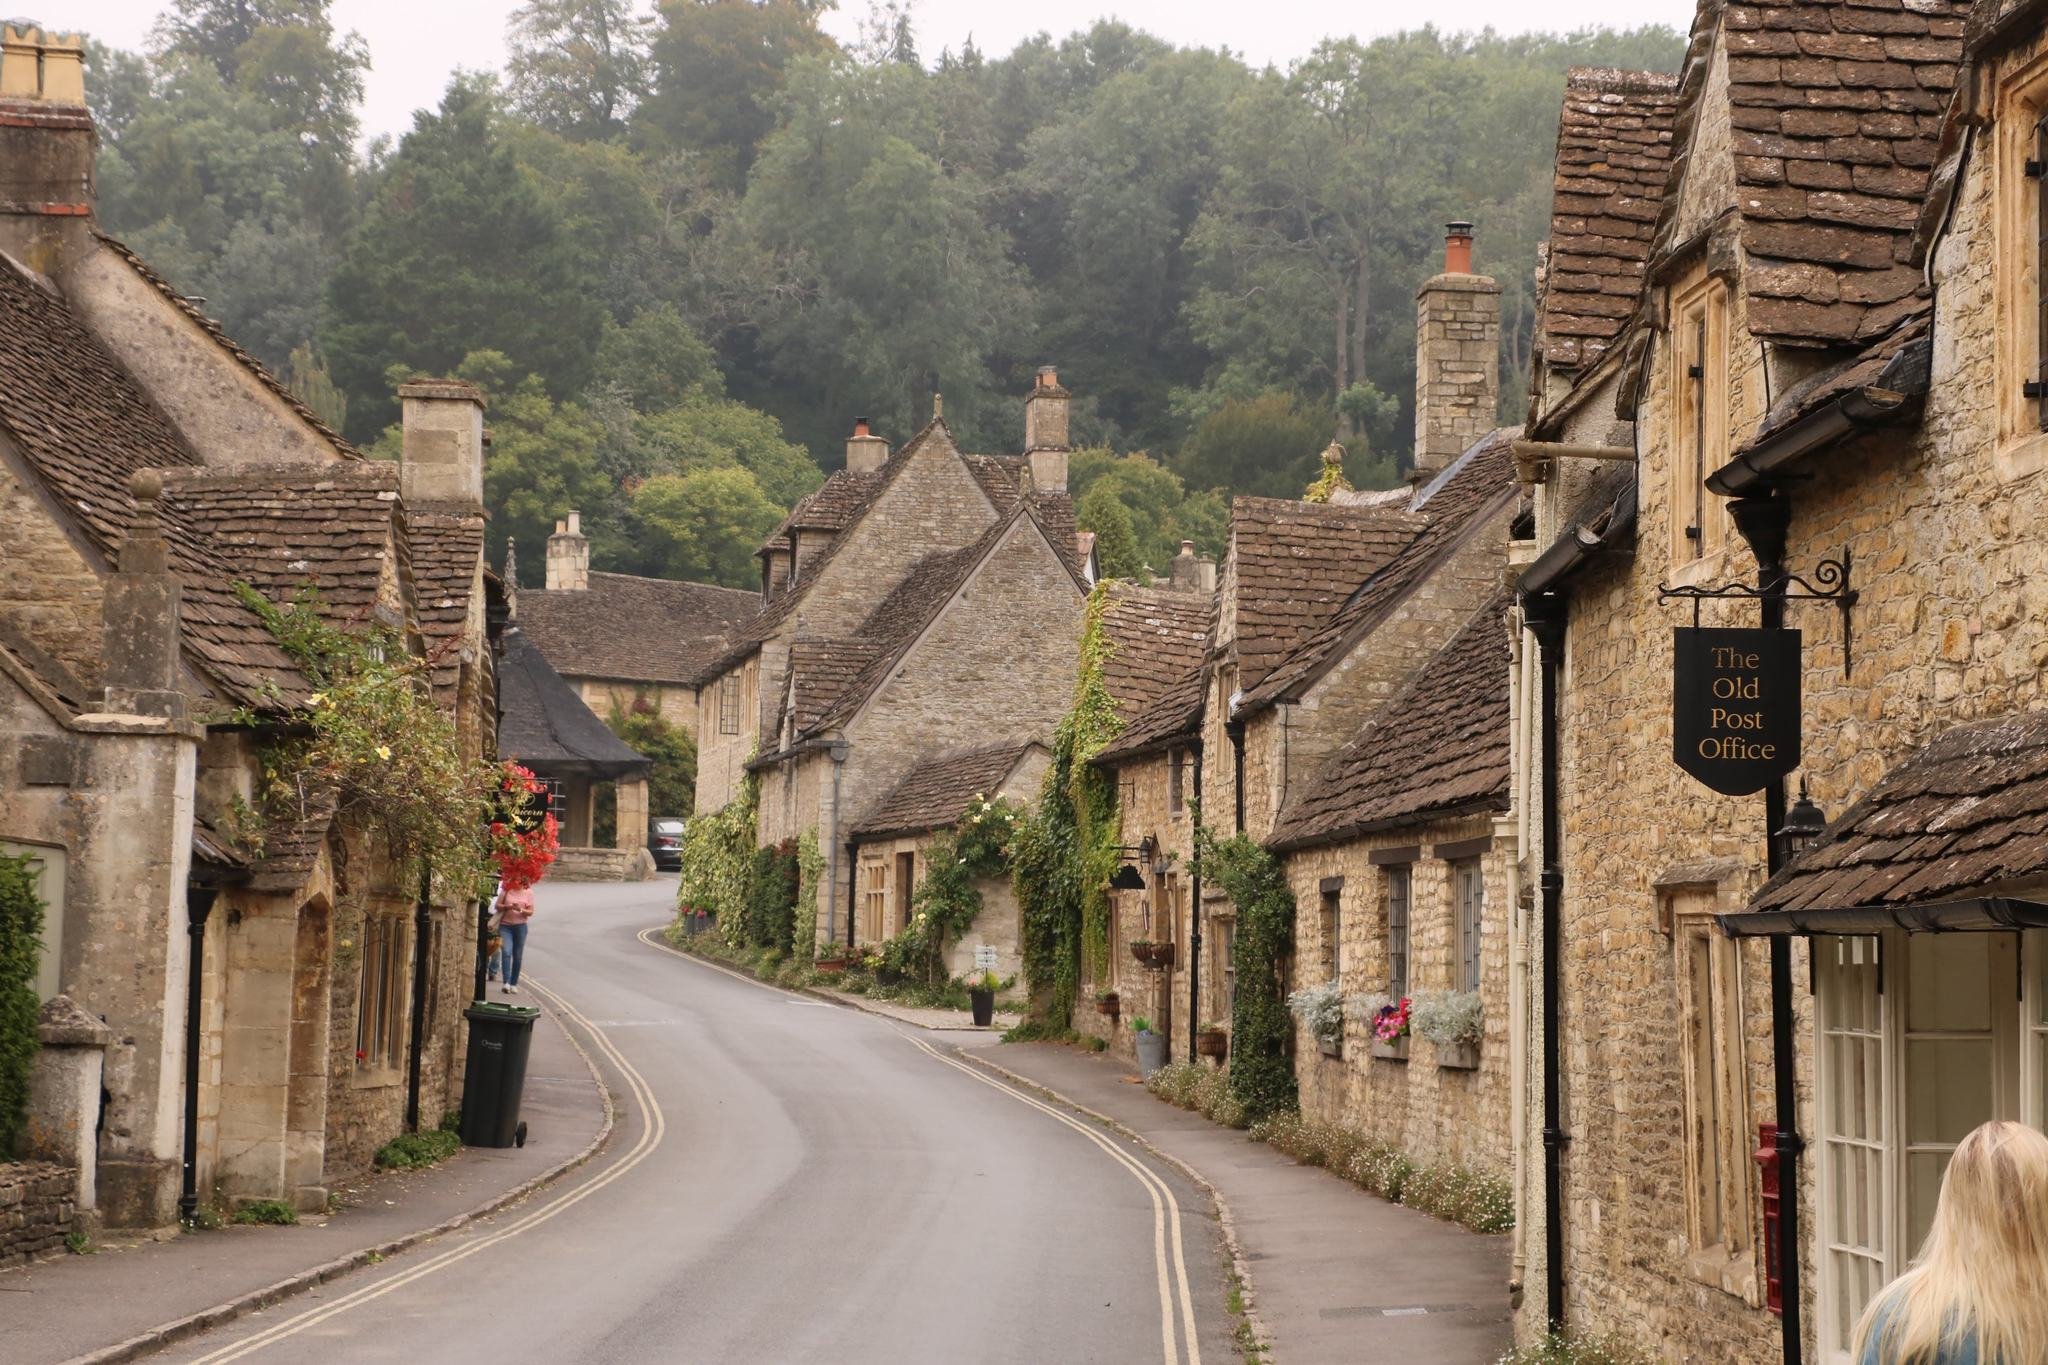 view of stone cottages on a street in the cotswolds